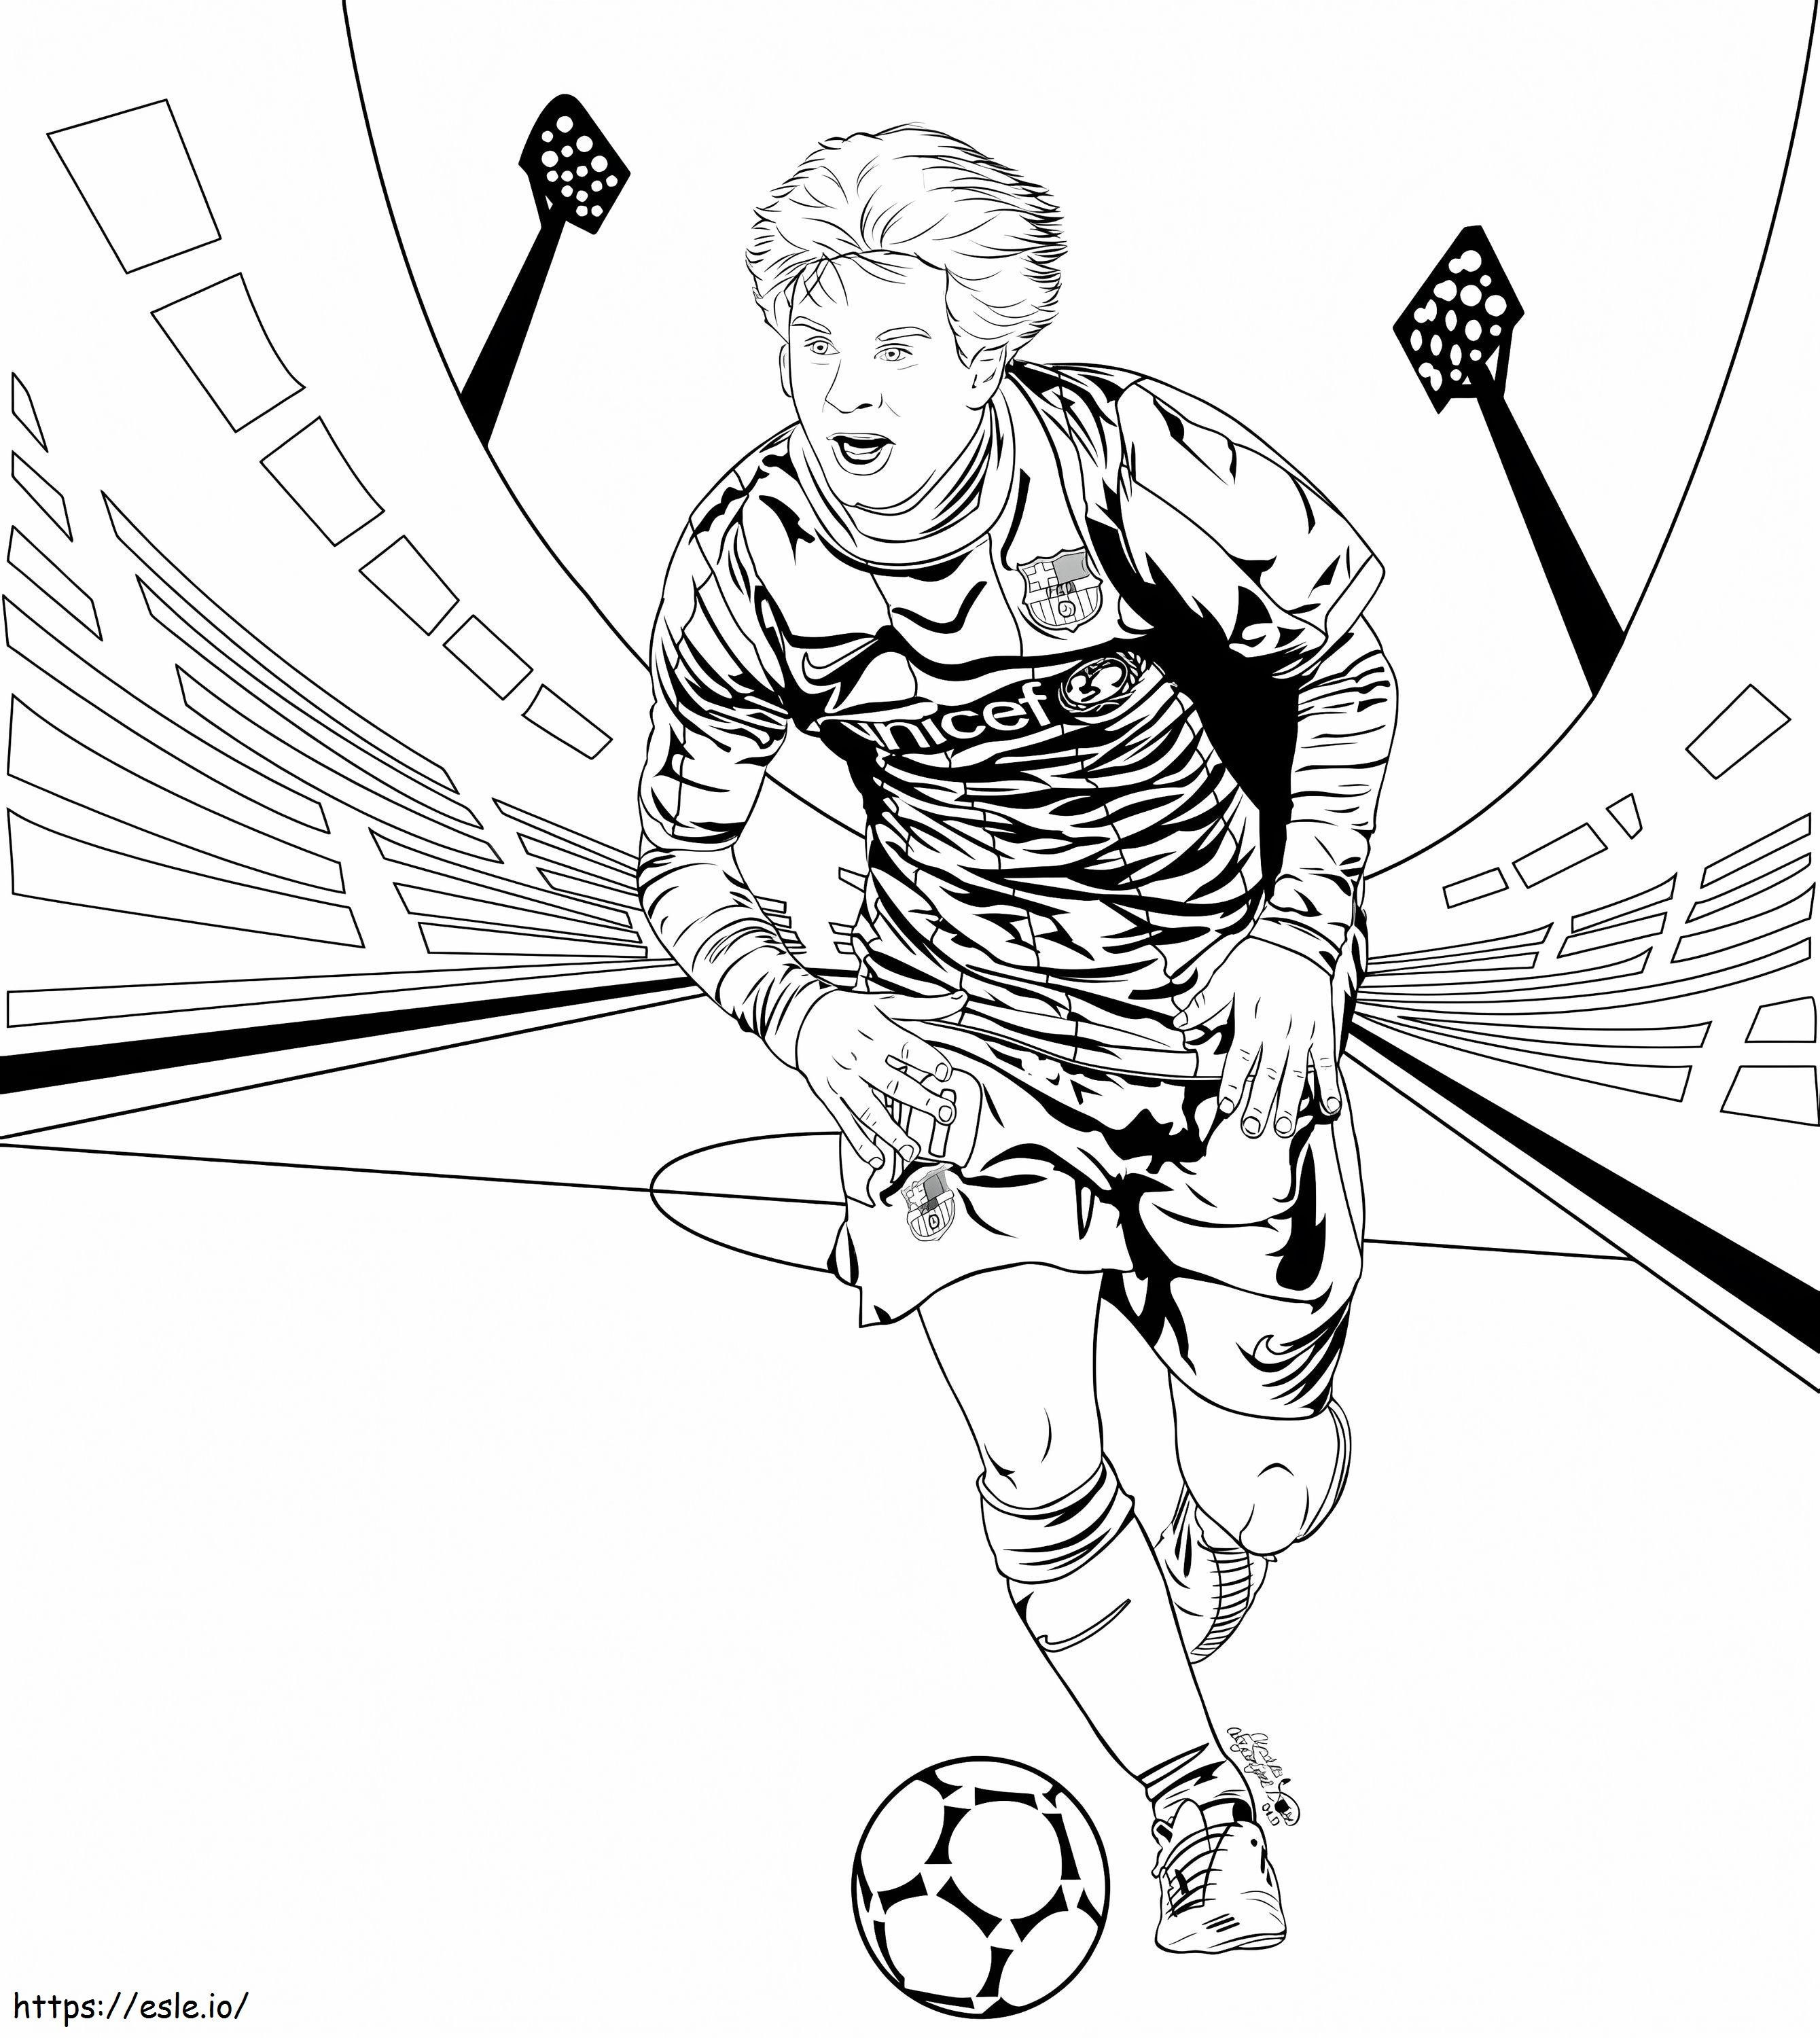 Lnel messi playing soccer coloring page